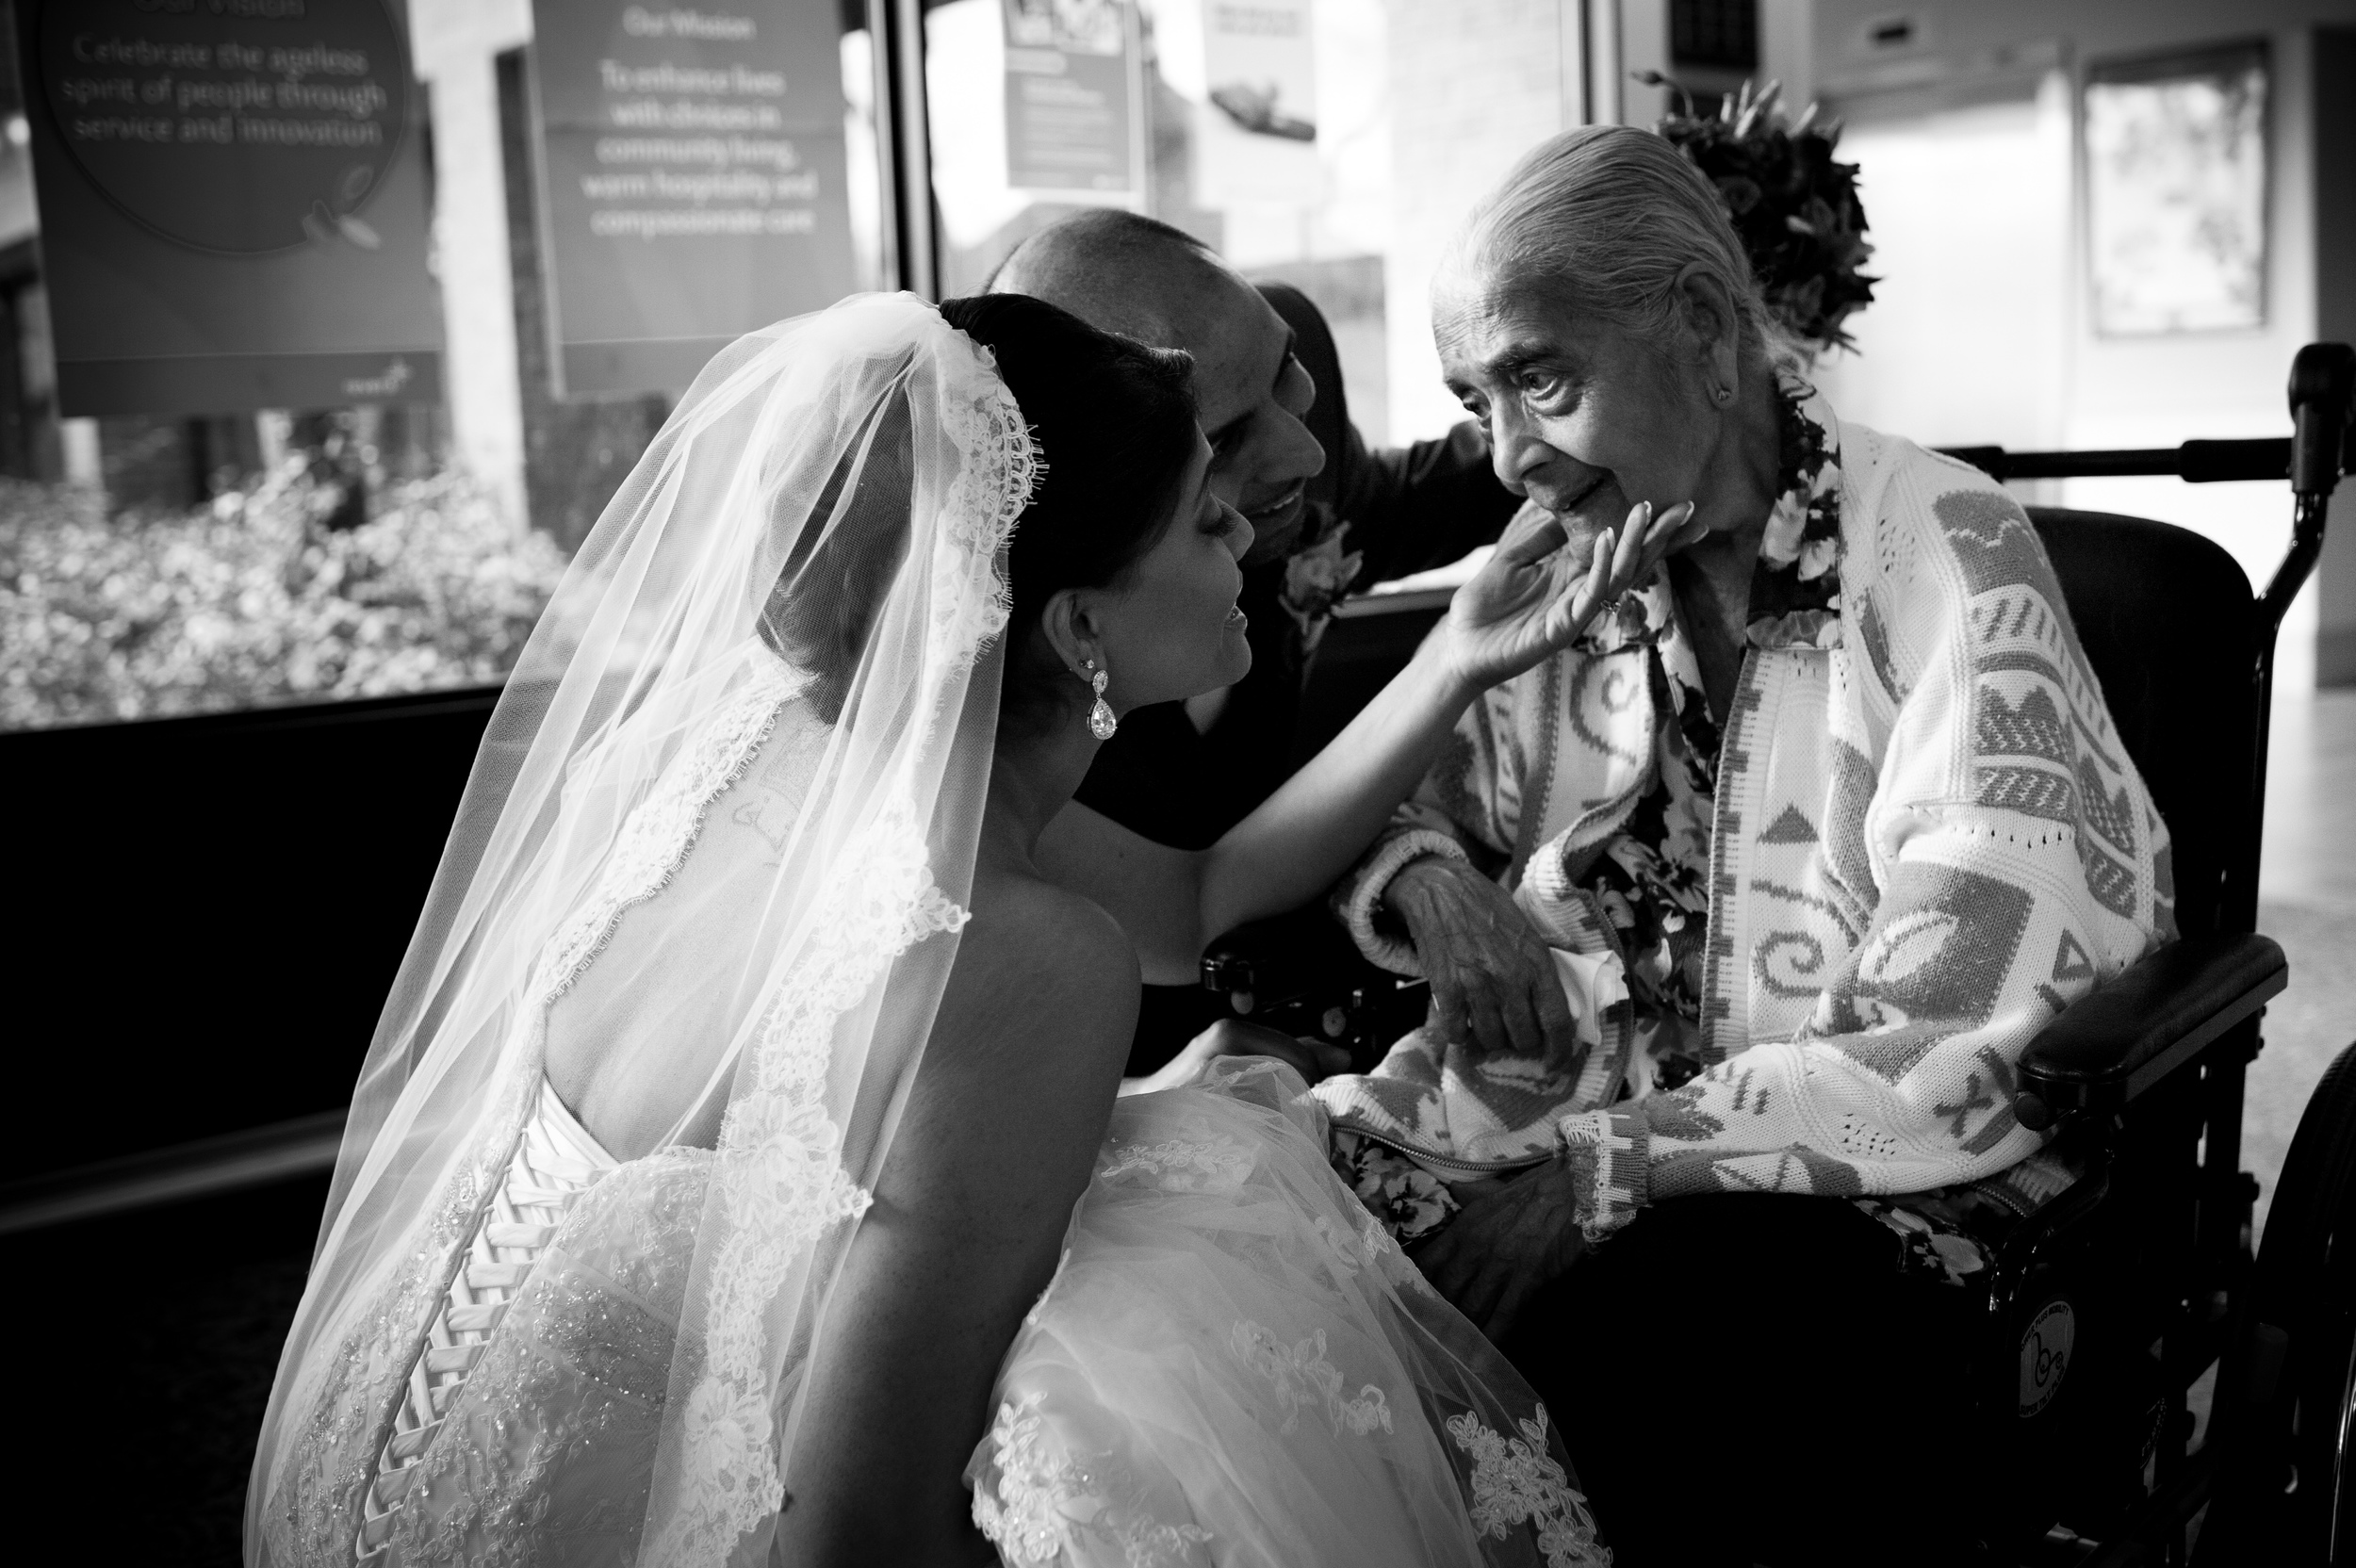  A bride visit's her grandmother in the nursing home immediately after her wedding ceremony. 